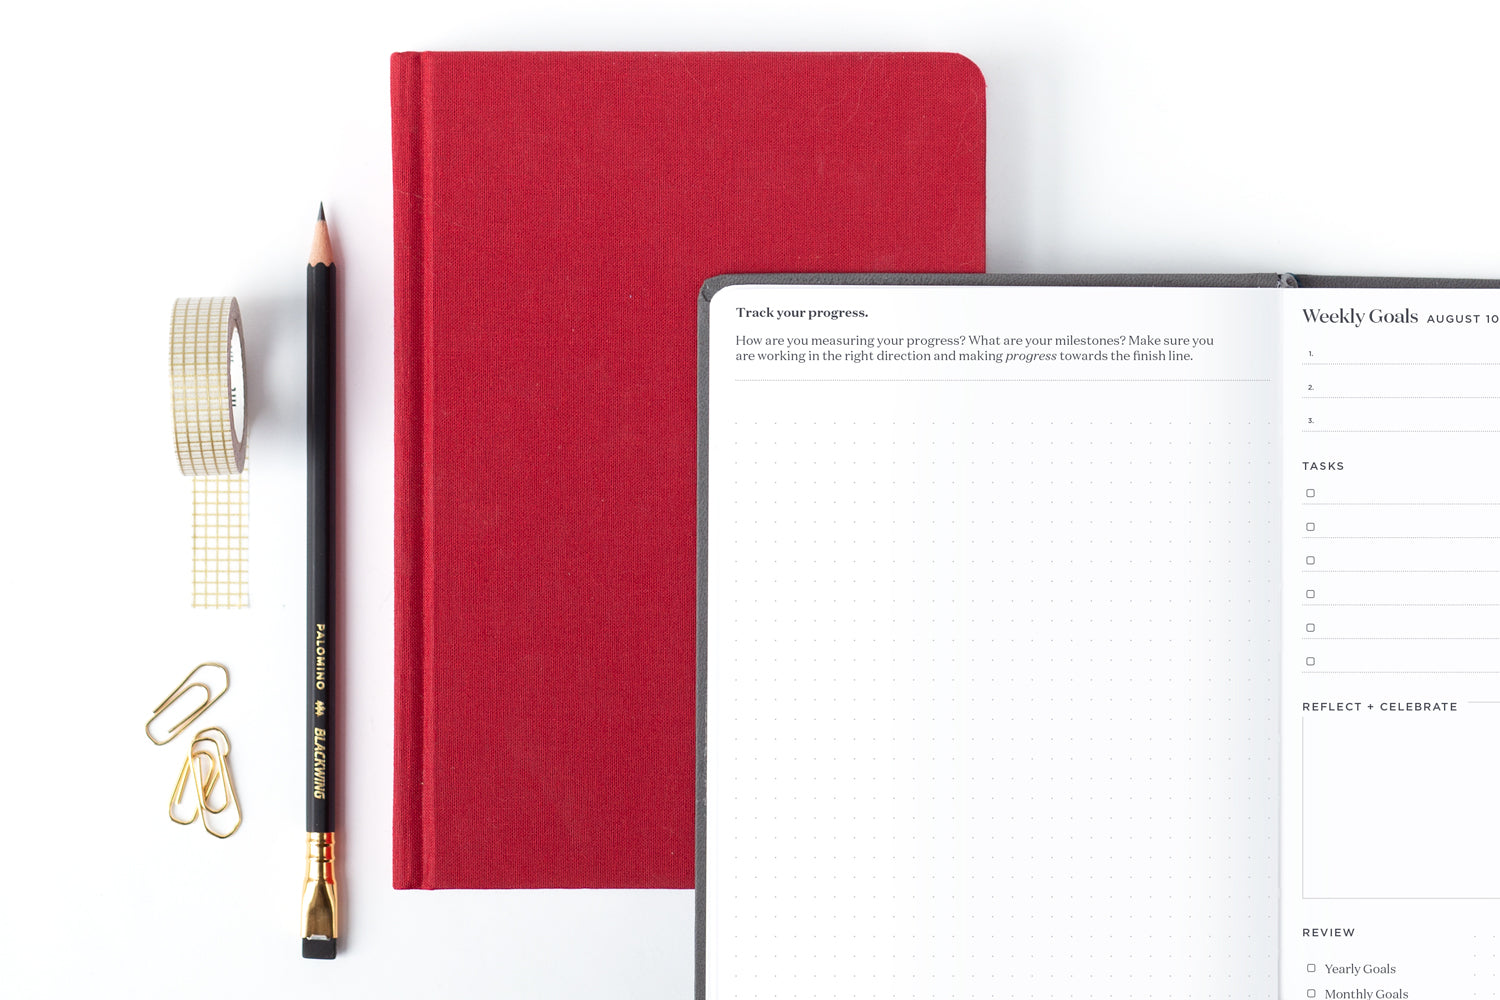 A red planner sits on a desk under another open planner, plus a pencil, washi tape, and gold paper clips.